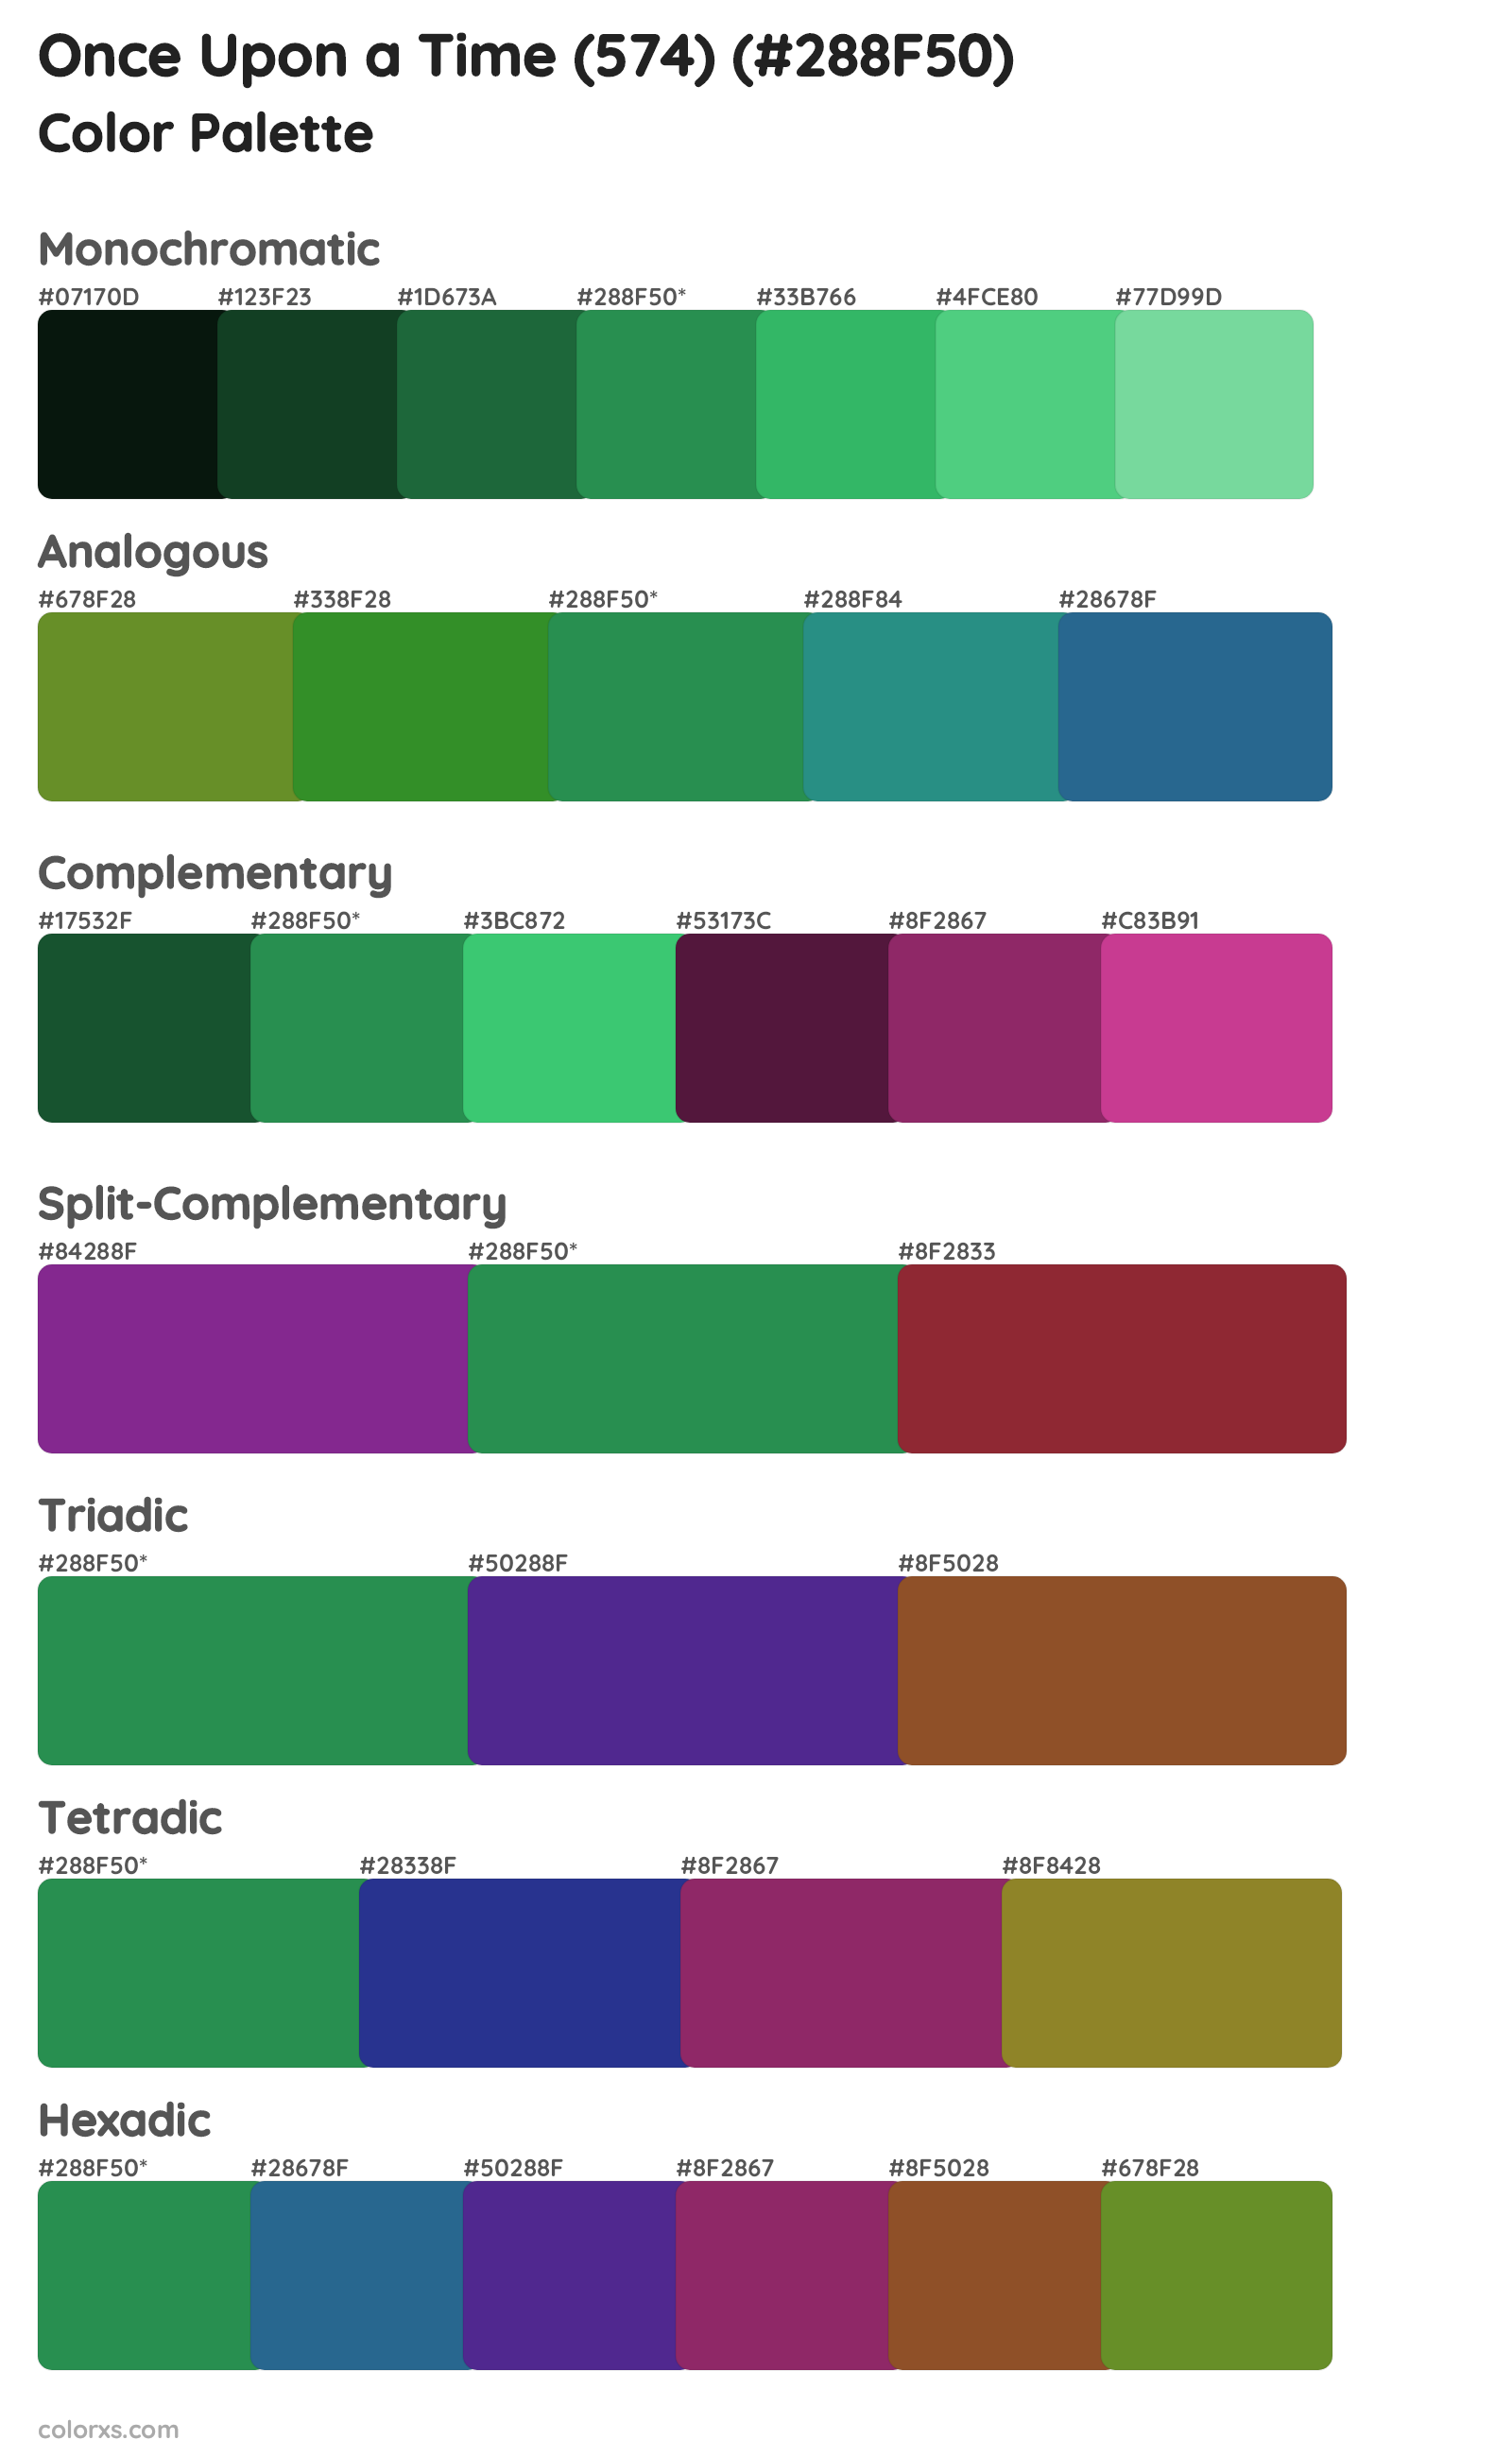 Once Upon a Time (574) Color Scheme Palettes